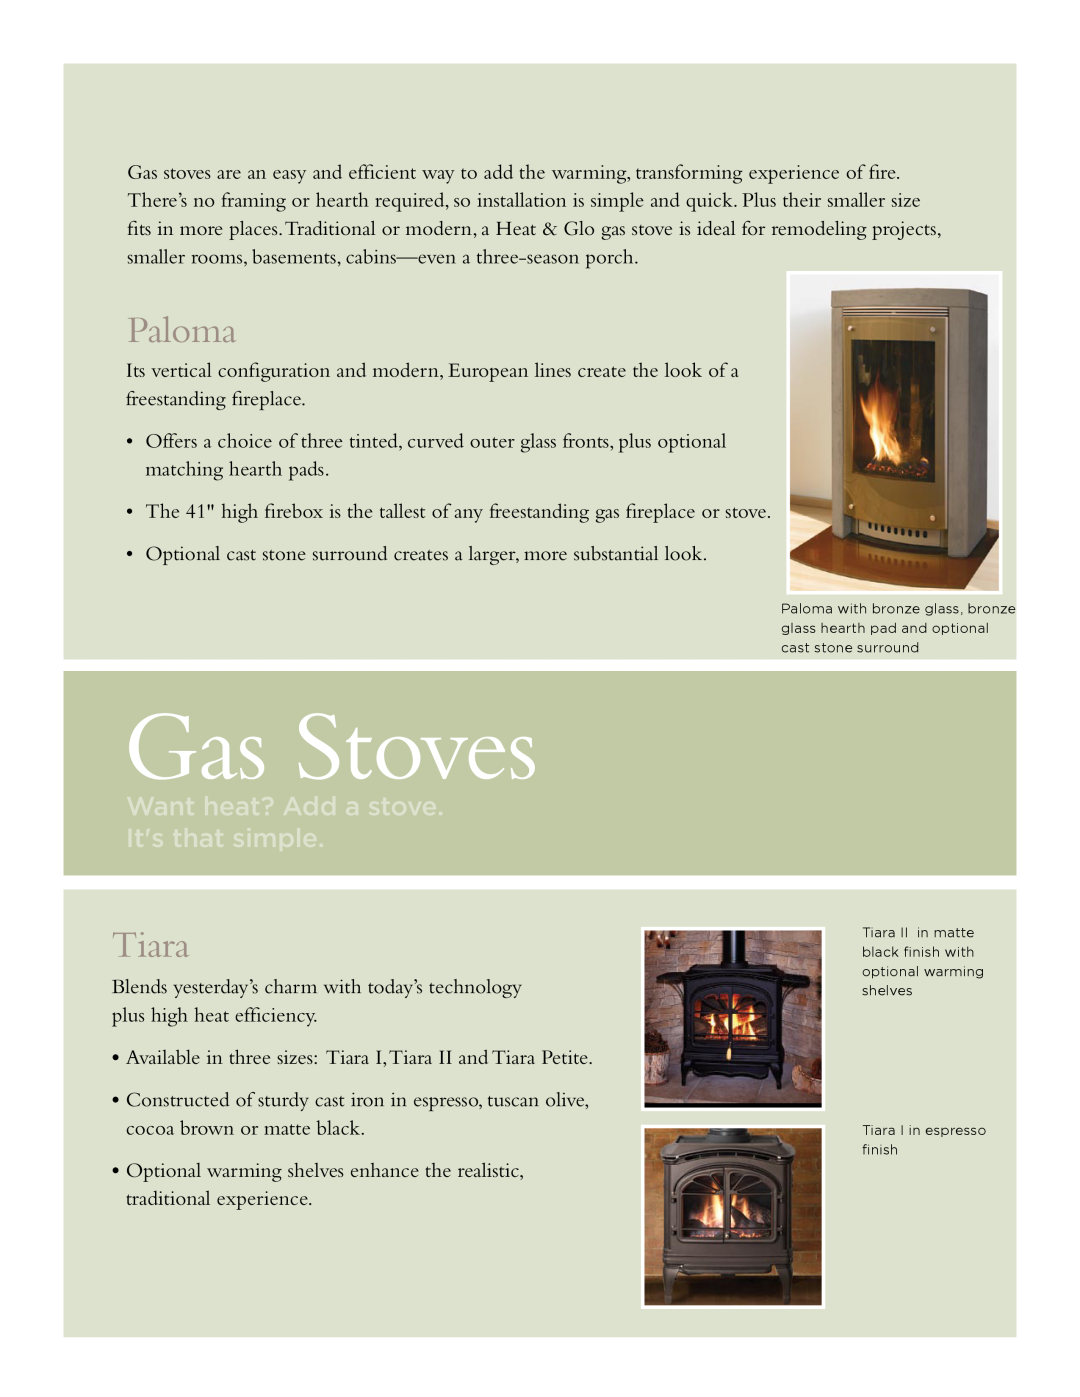 Hearth and Home Technologies TIARA II manual Gas Stoves, Paloma, Tiara, Want heat? Add a stove Its that simple 